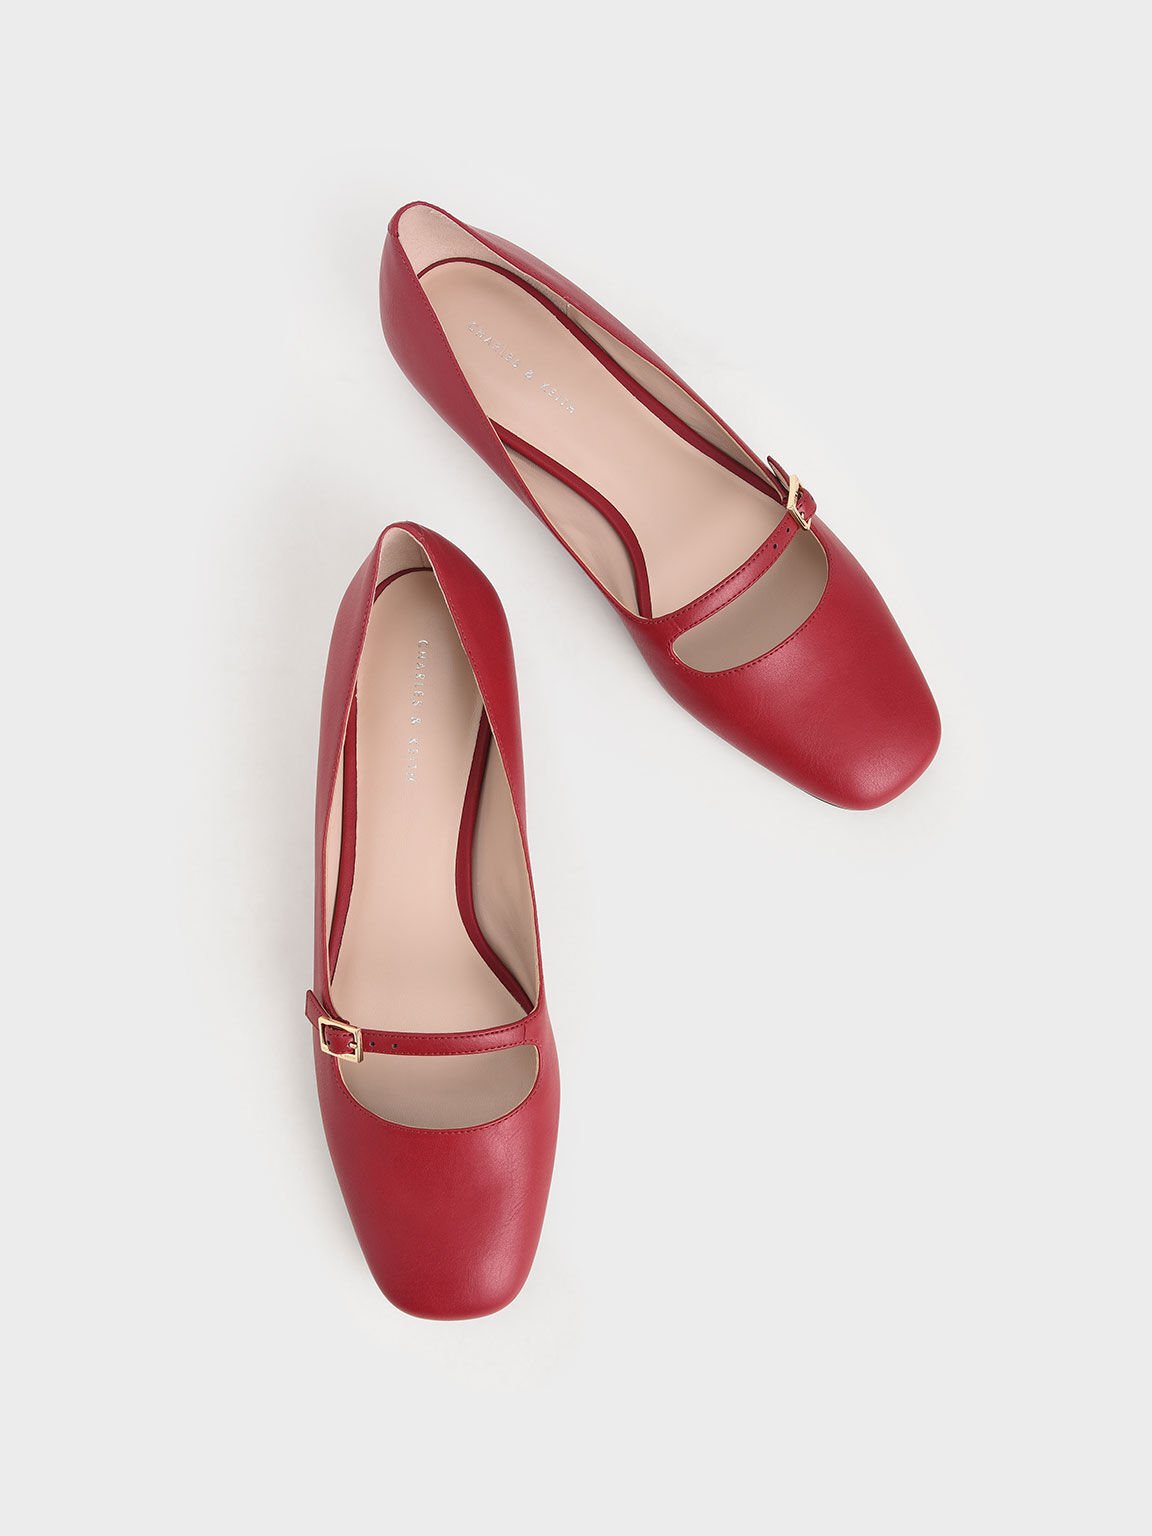 Mary Jane Flats, Red, hi-res